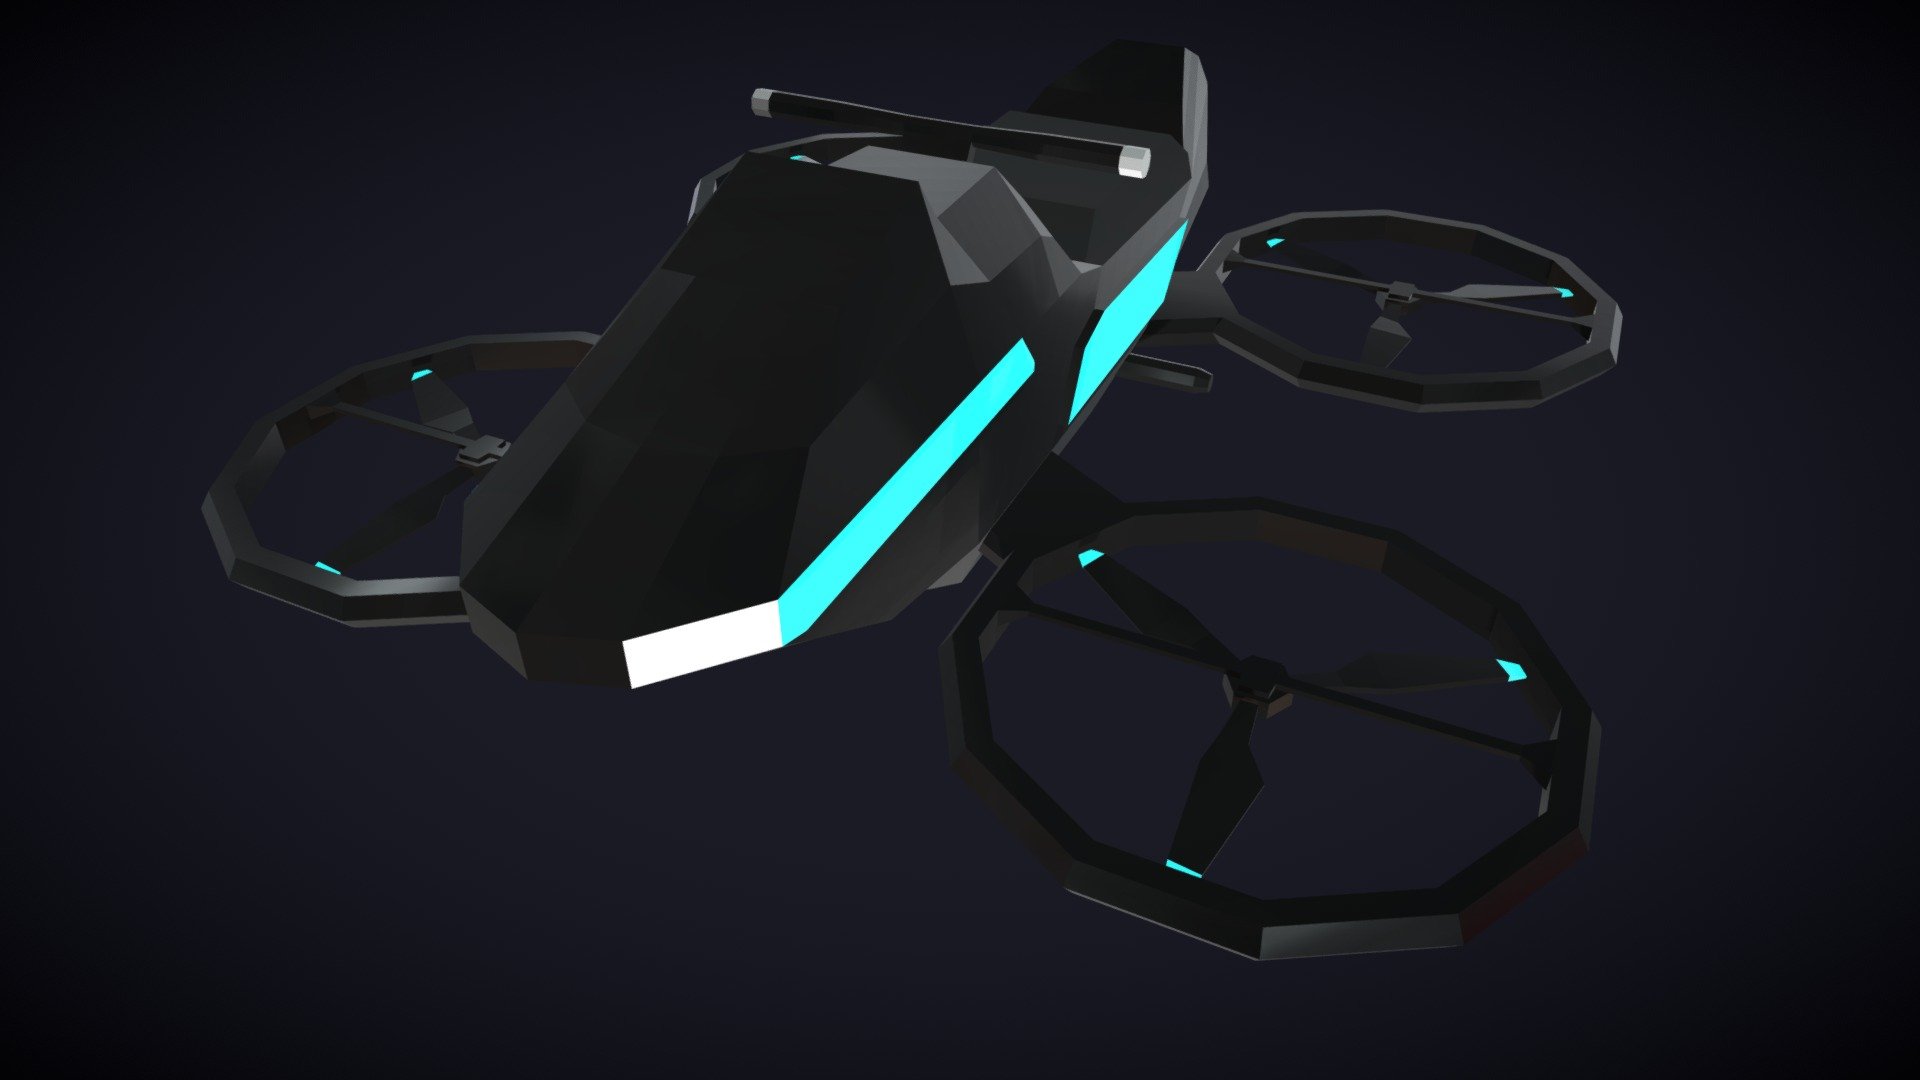 A lowpoly hoverbike, a combination of a motorcycle and a drone. You could use it for a lowpoly scifi game or a scifi scene of a video. Maybe you could use it for a racing game or a scifi cop-game. The model is created in Blender and rendered in Cycles 3d model